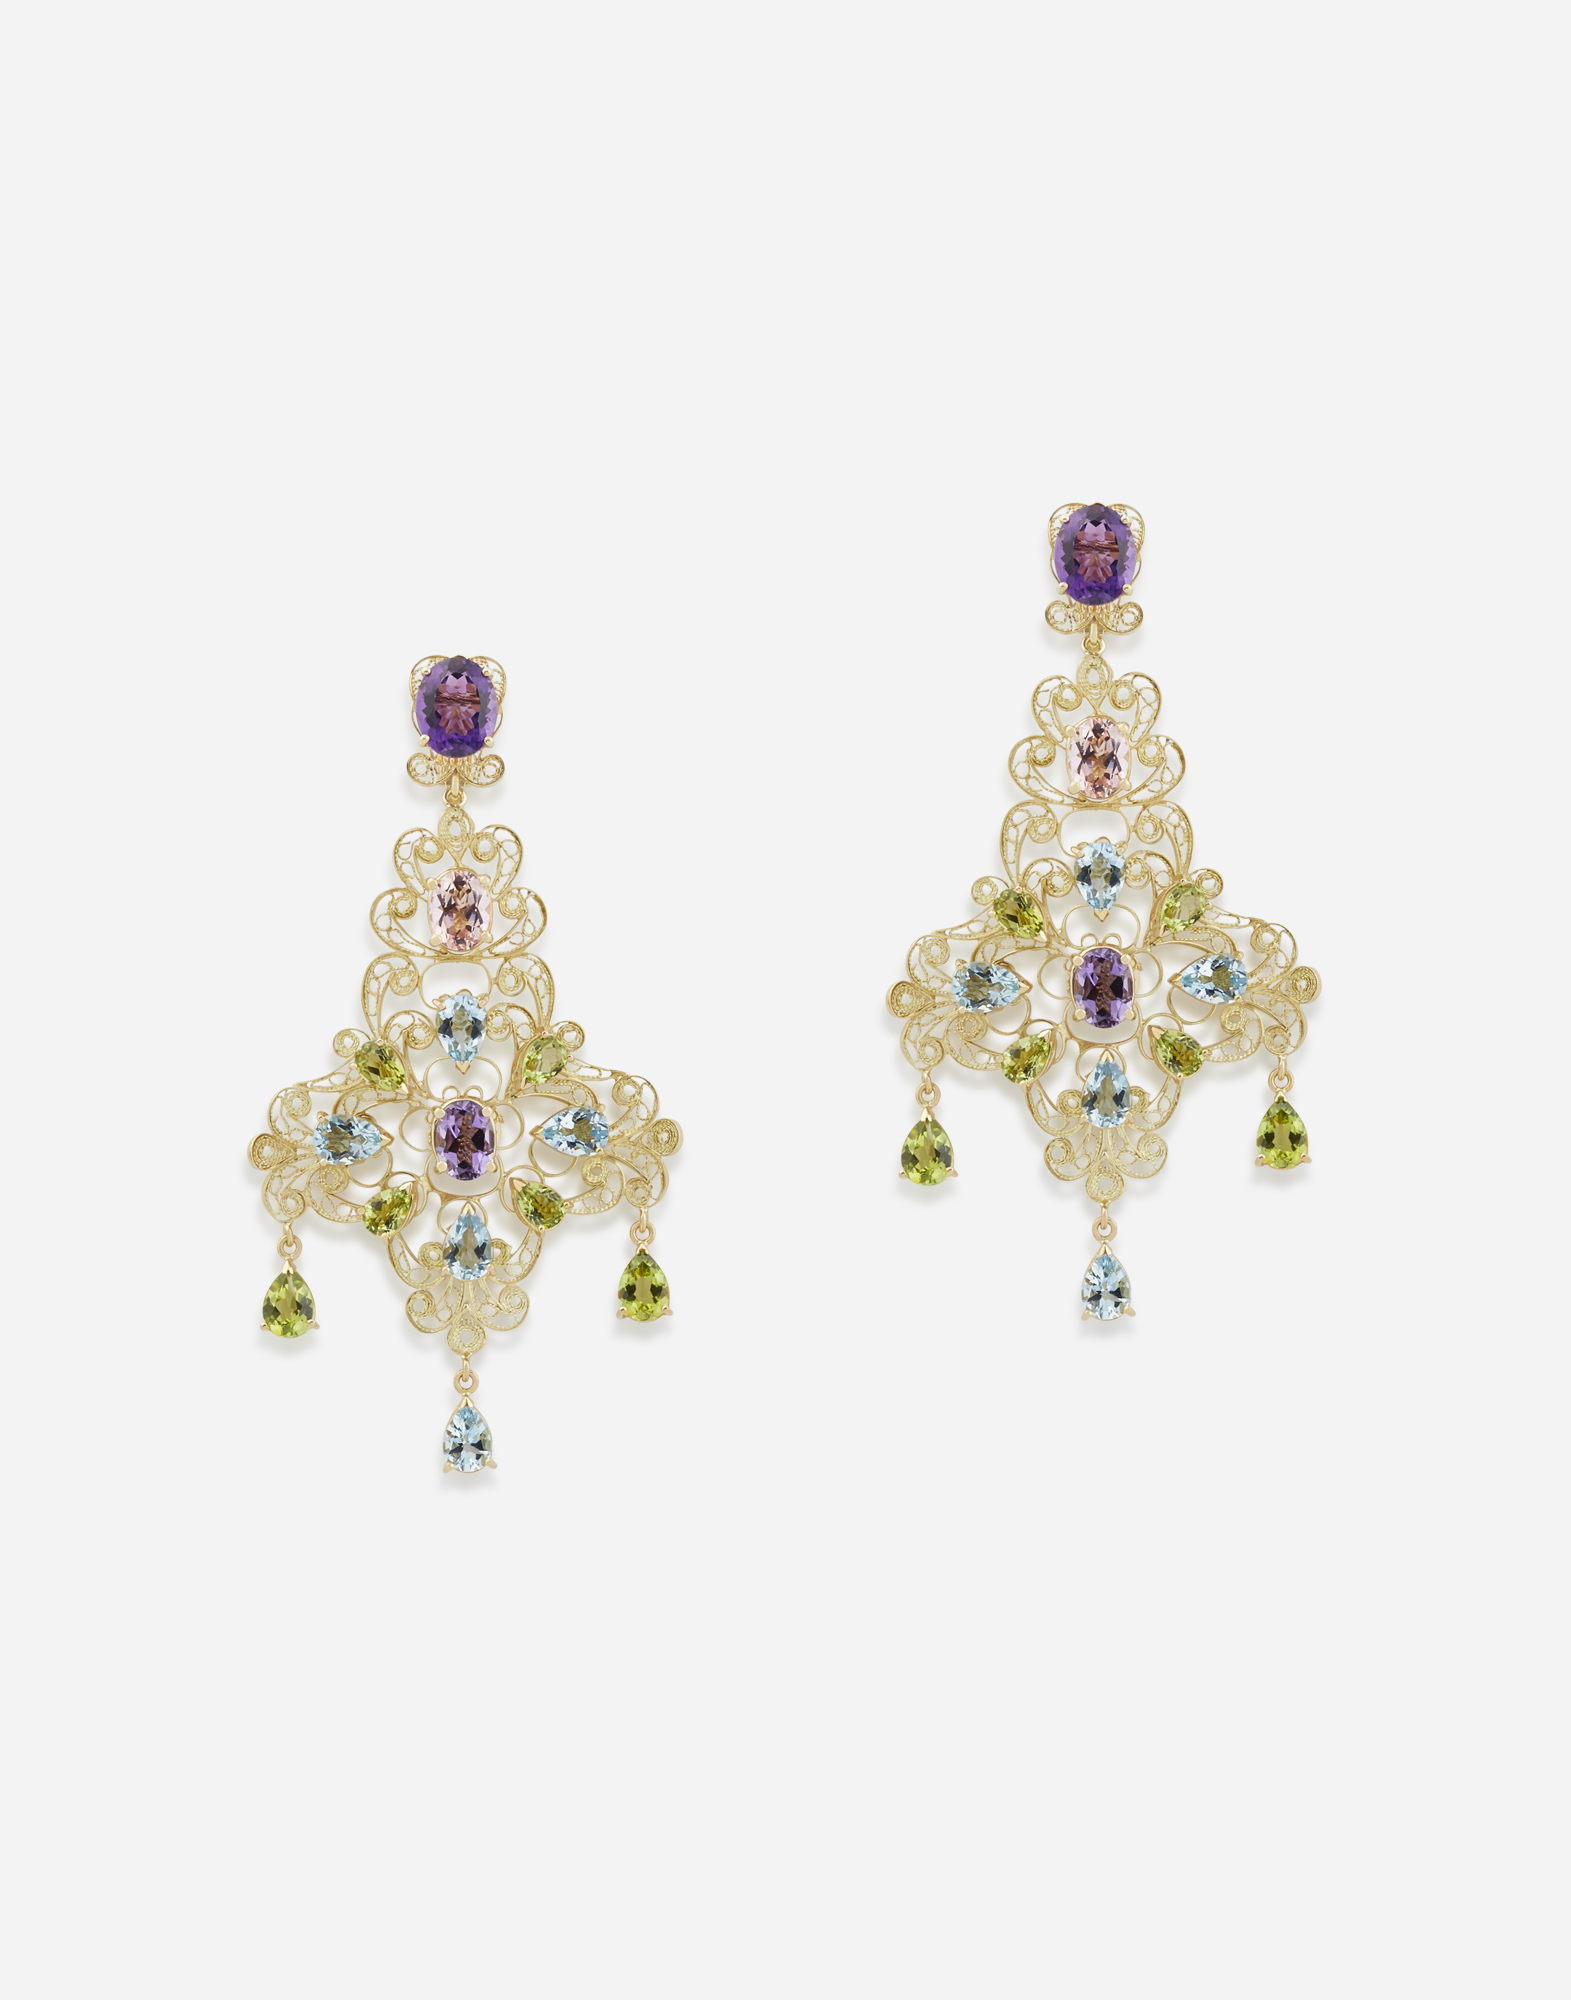 Shop Dolce & Gabbana Pizzo Earrings In Yellow Gold Filigree With Amethysts, Aquamarines, Peridots And Morganites